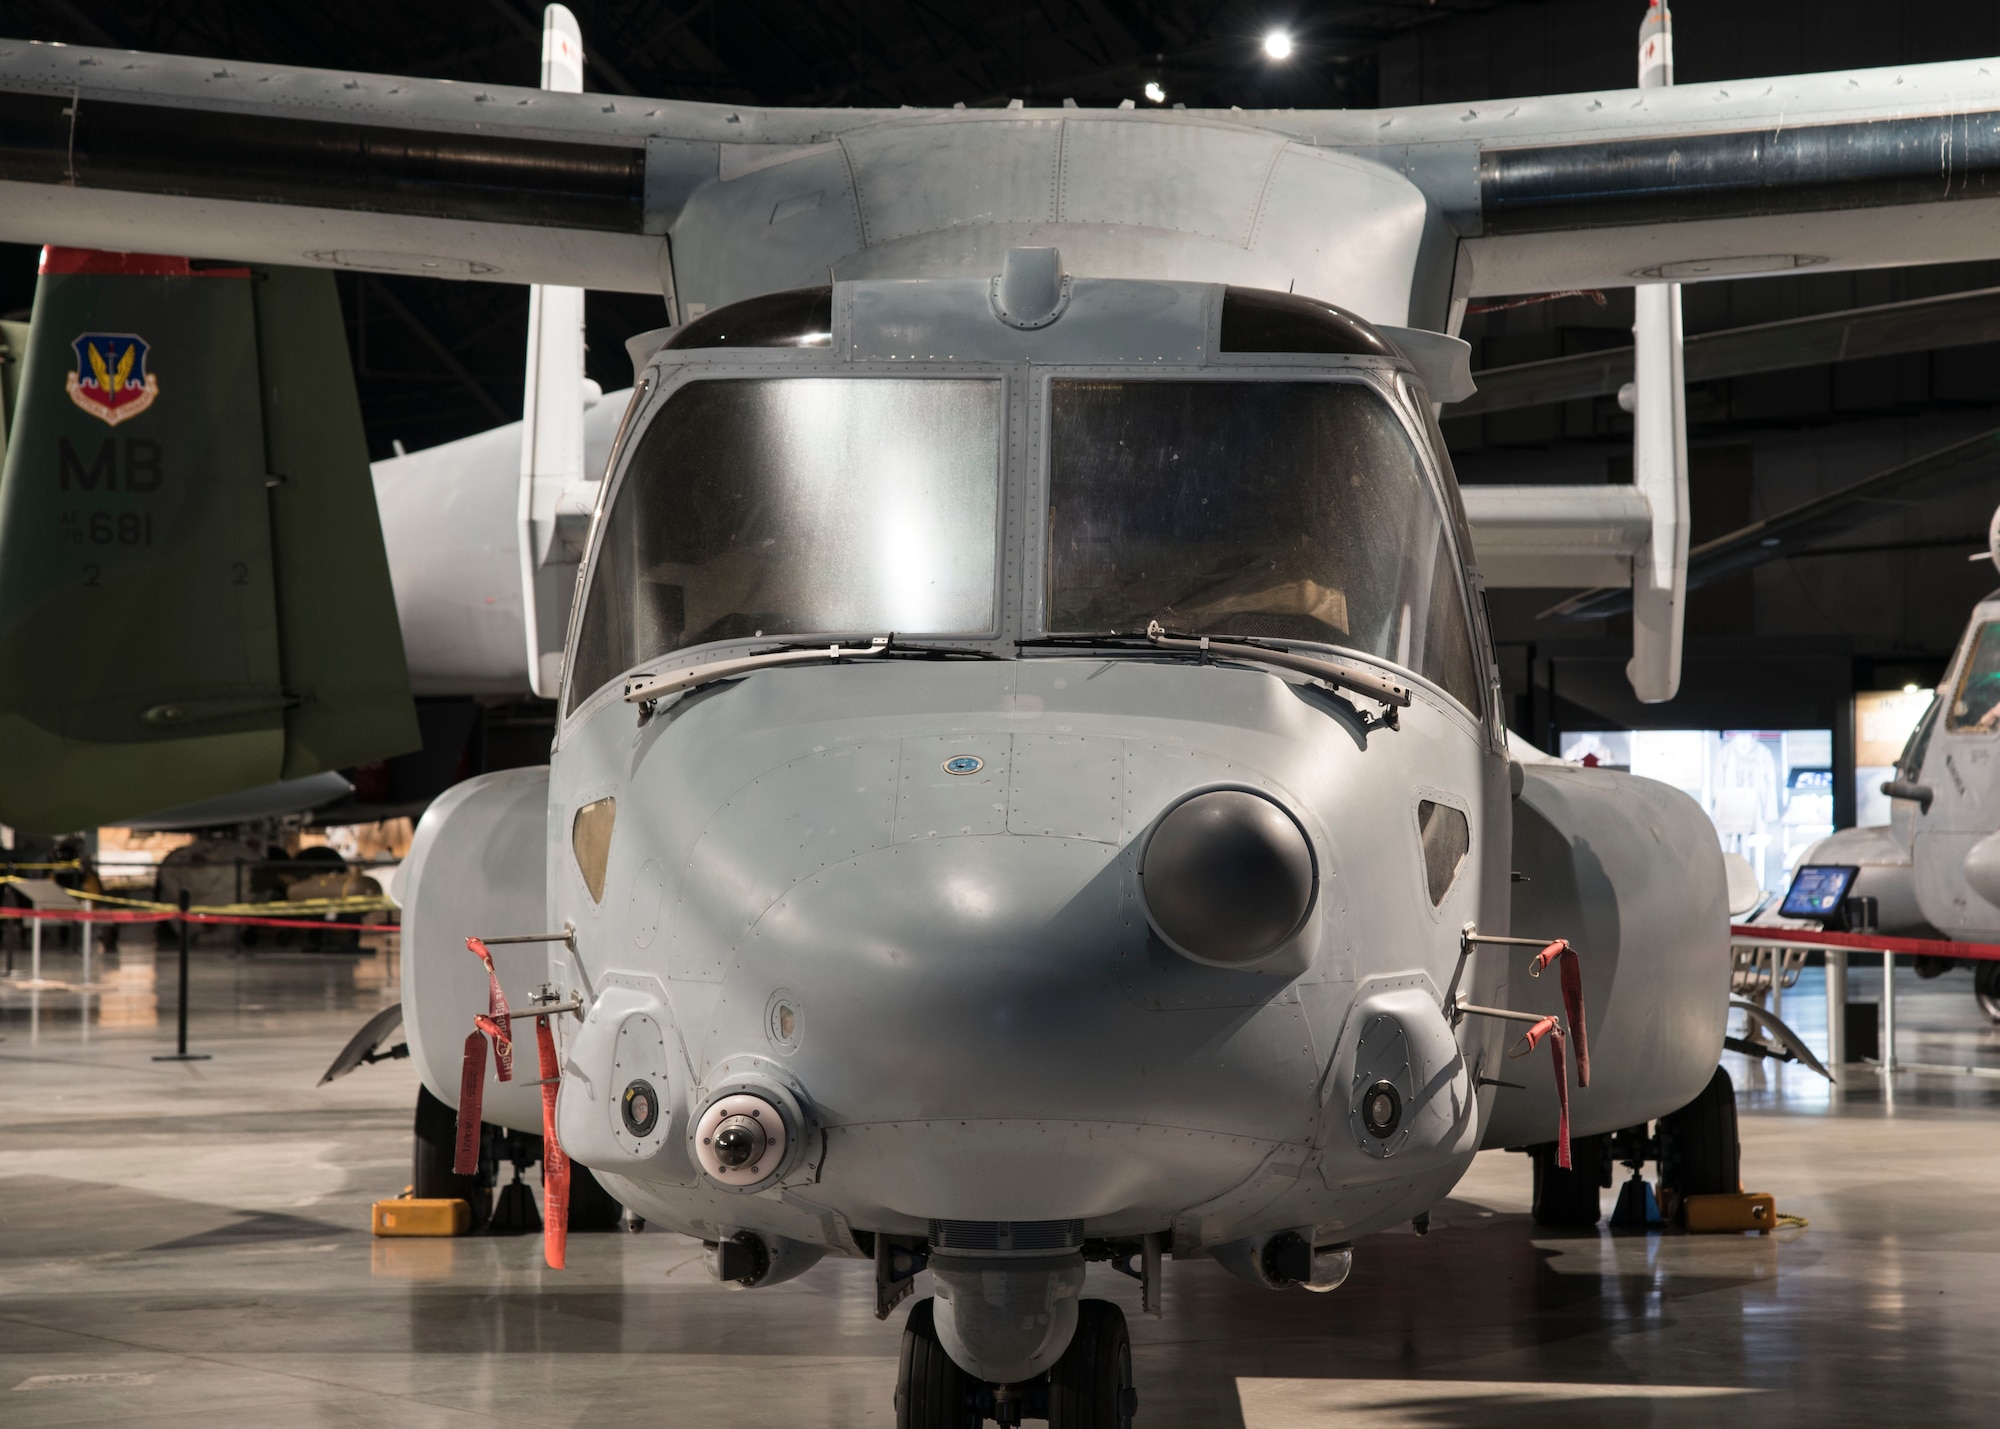 DAYTON, Ohio -- The Bell-Boeing CV-22B Osprey on display in the Cold War Gallery at the National Museum of the U.S. Air Force.(U.S. Air Force photo by Ken LaRock)